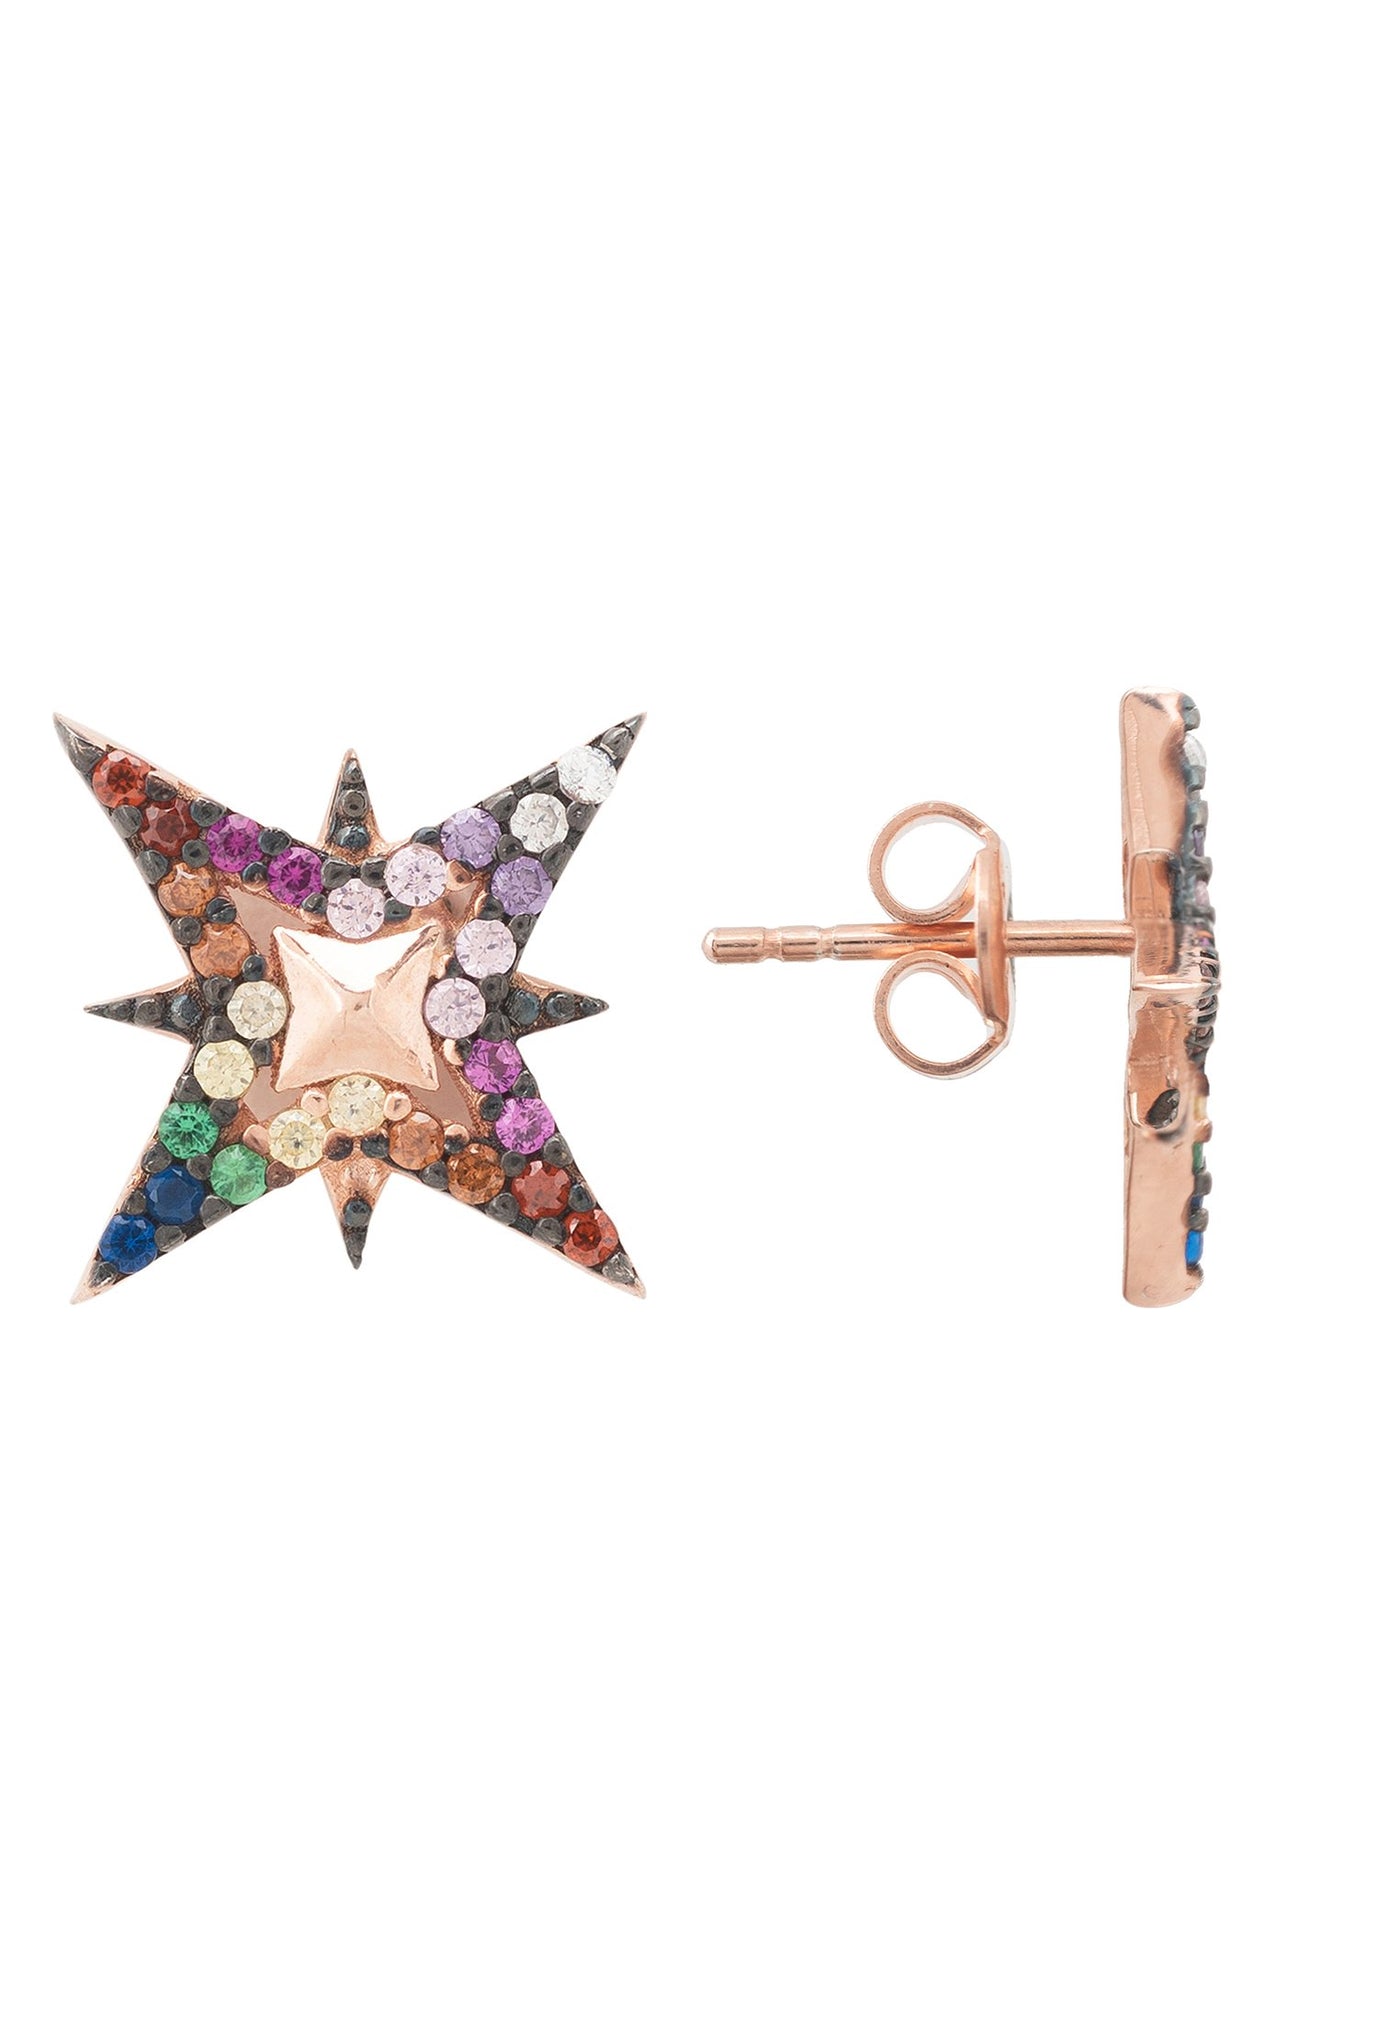 Stud earrings - North Star colorful - 22 carat gold plated - zircons